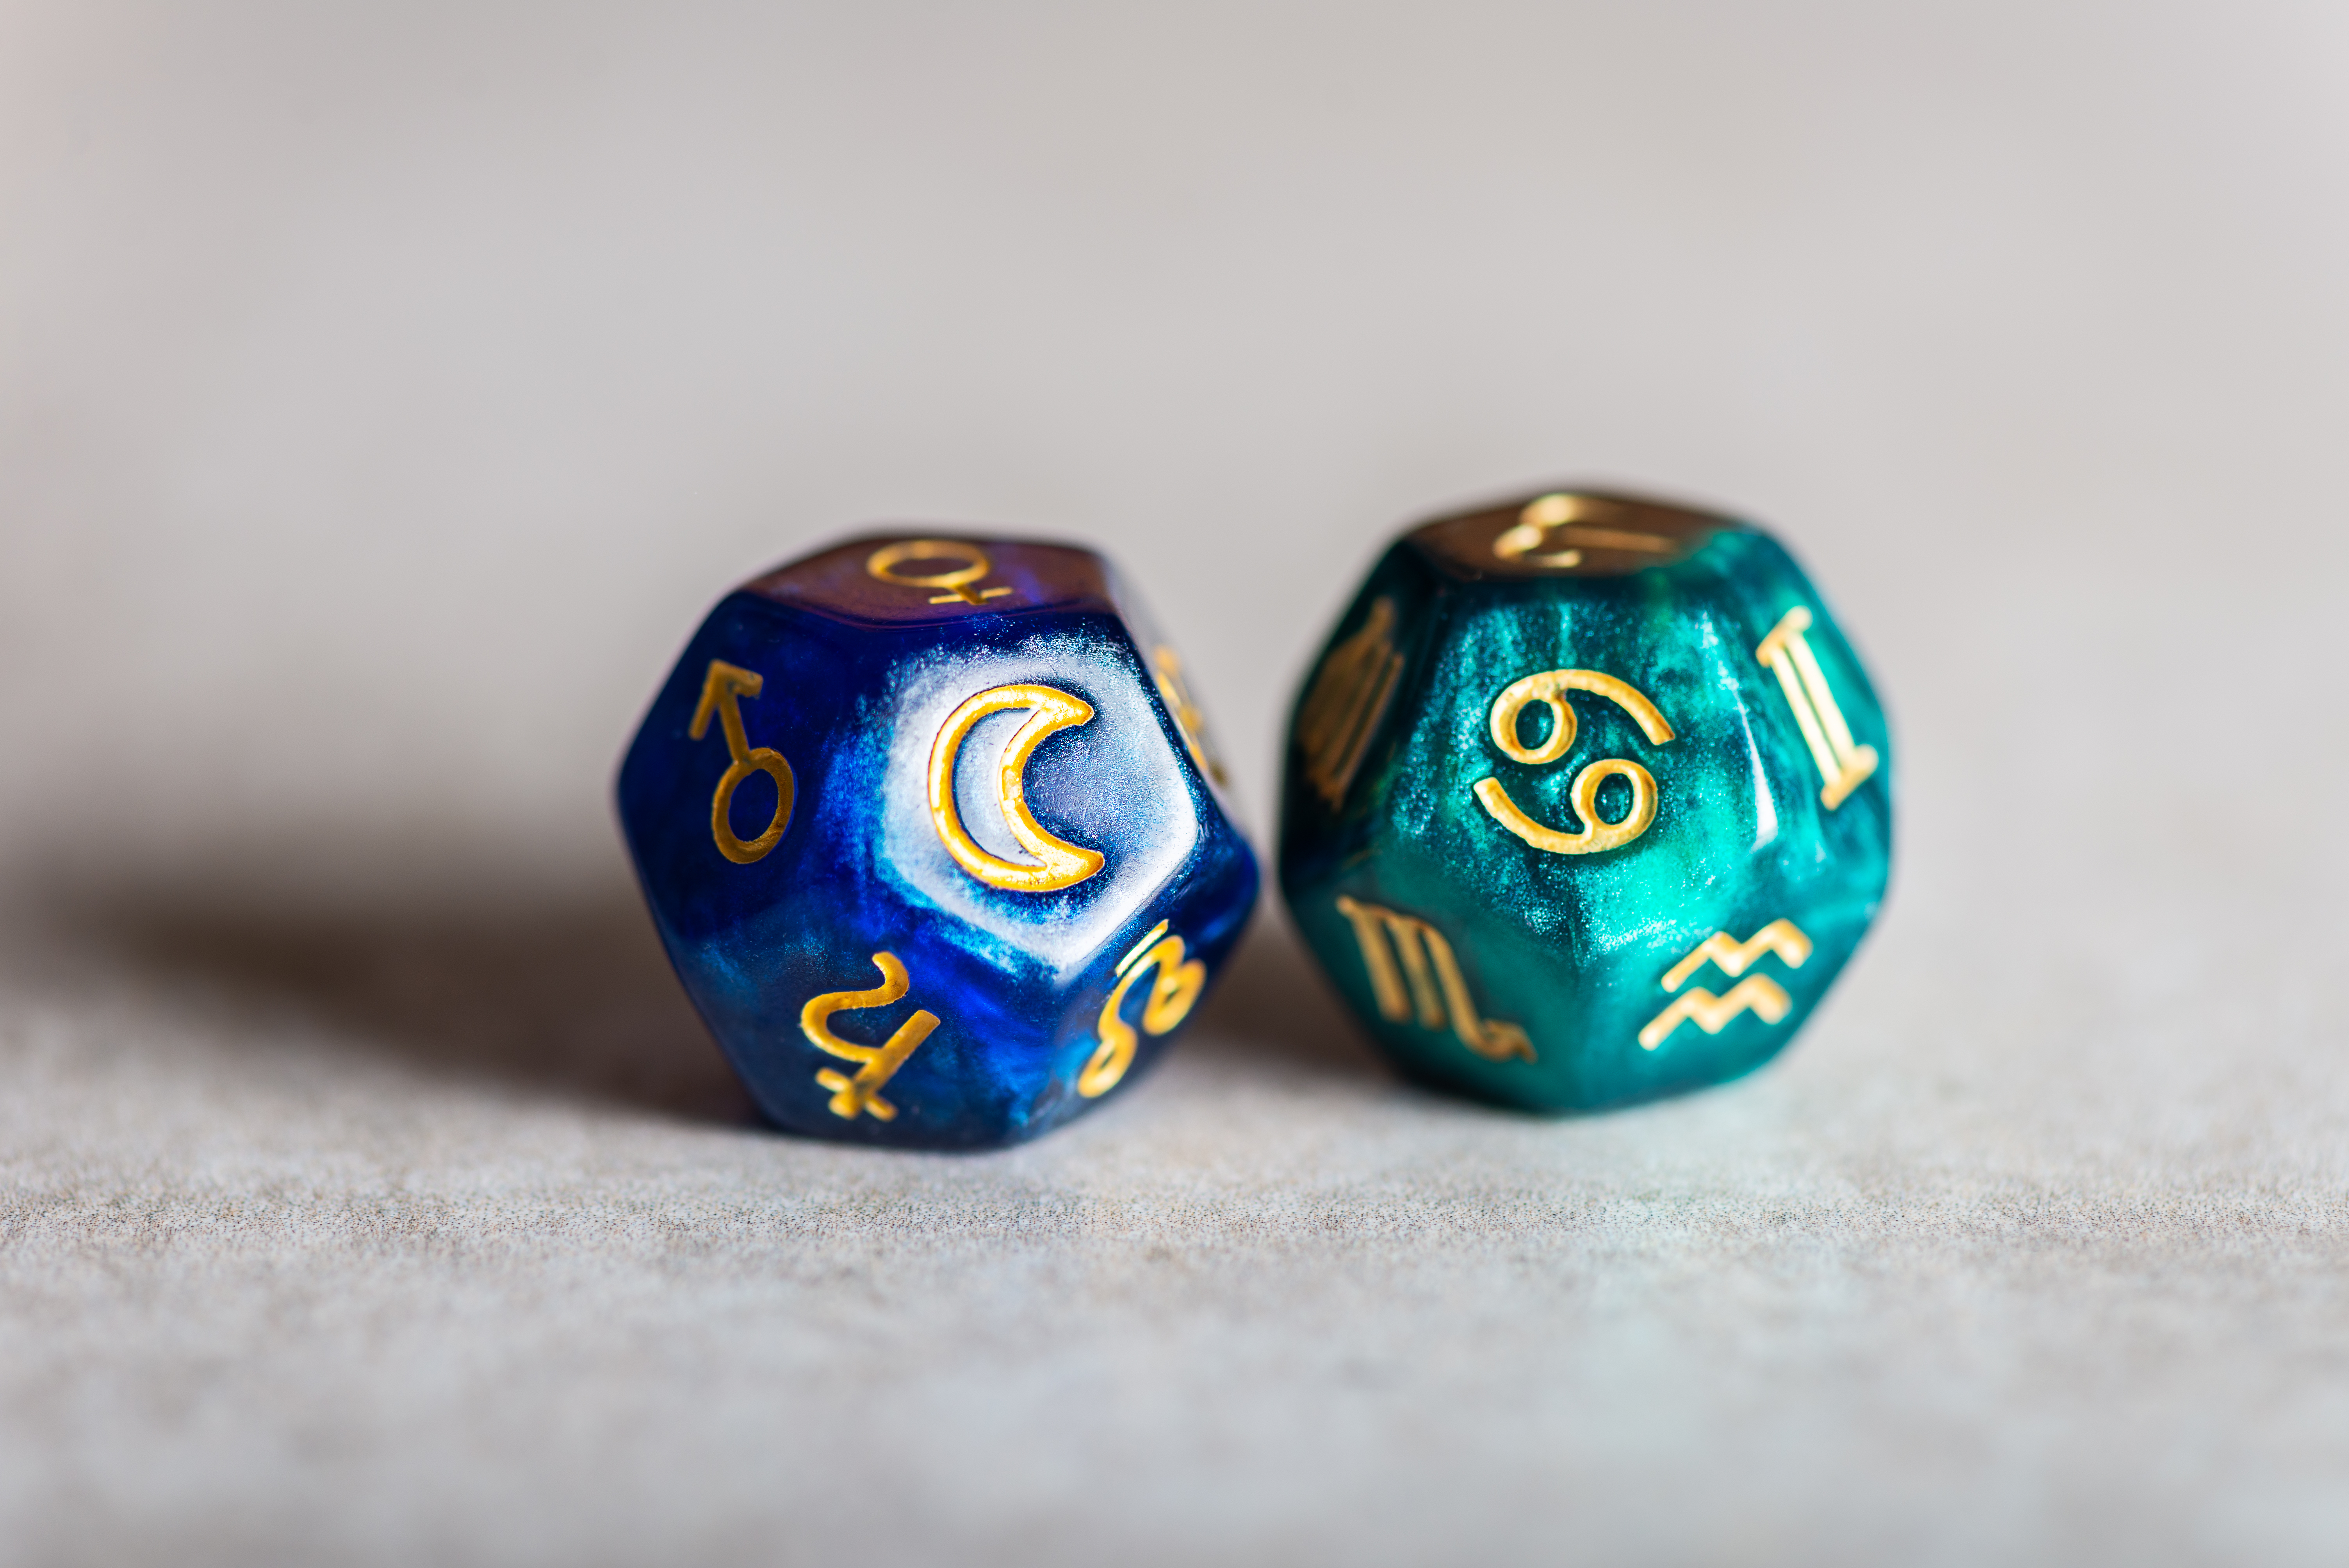 Astrology Dice with zodiac symbol of Cancer on one and a moon on the other